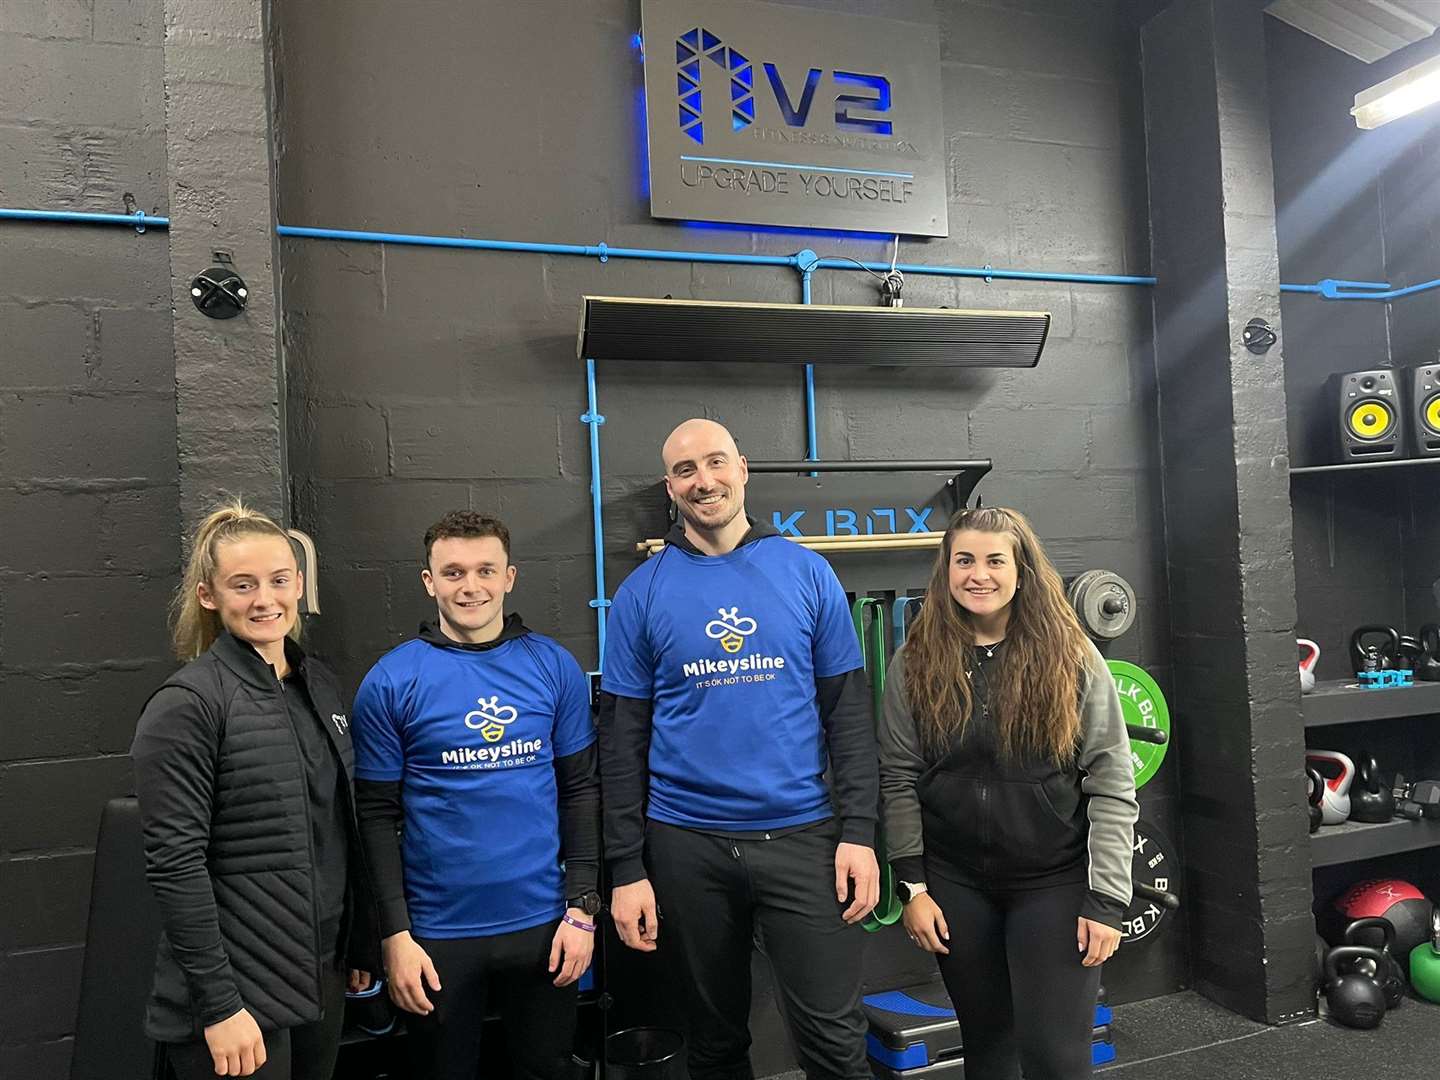 A team from NV2 Fitness in Muir of Ord is one of the groups taking part in the Inverness Half Marathon for Mikeysline. Pictured are Cara Wilson, Kieran Chalmers, Nicco Tought and Ashley Streets.